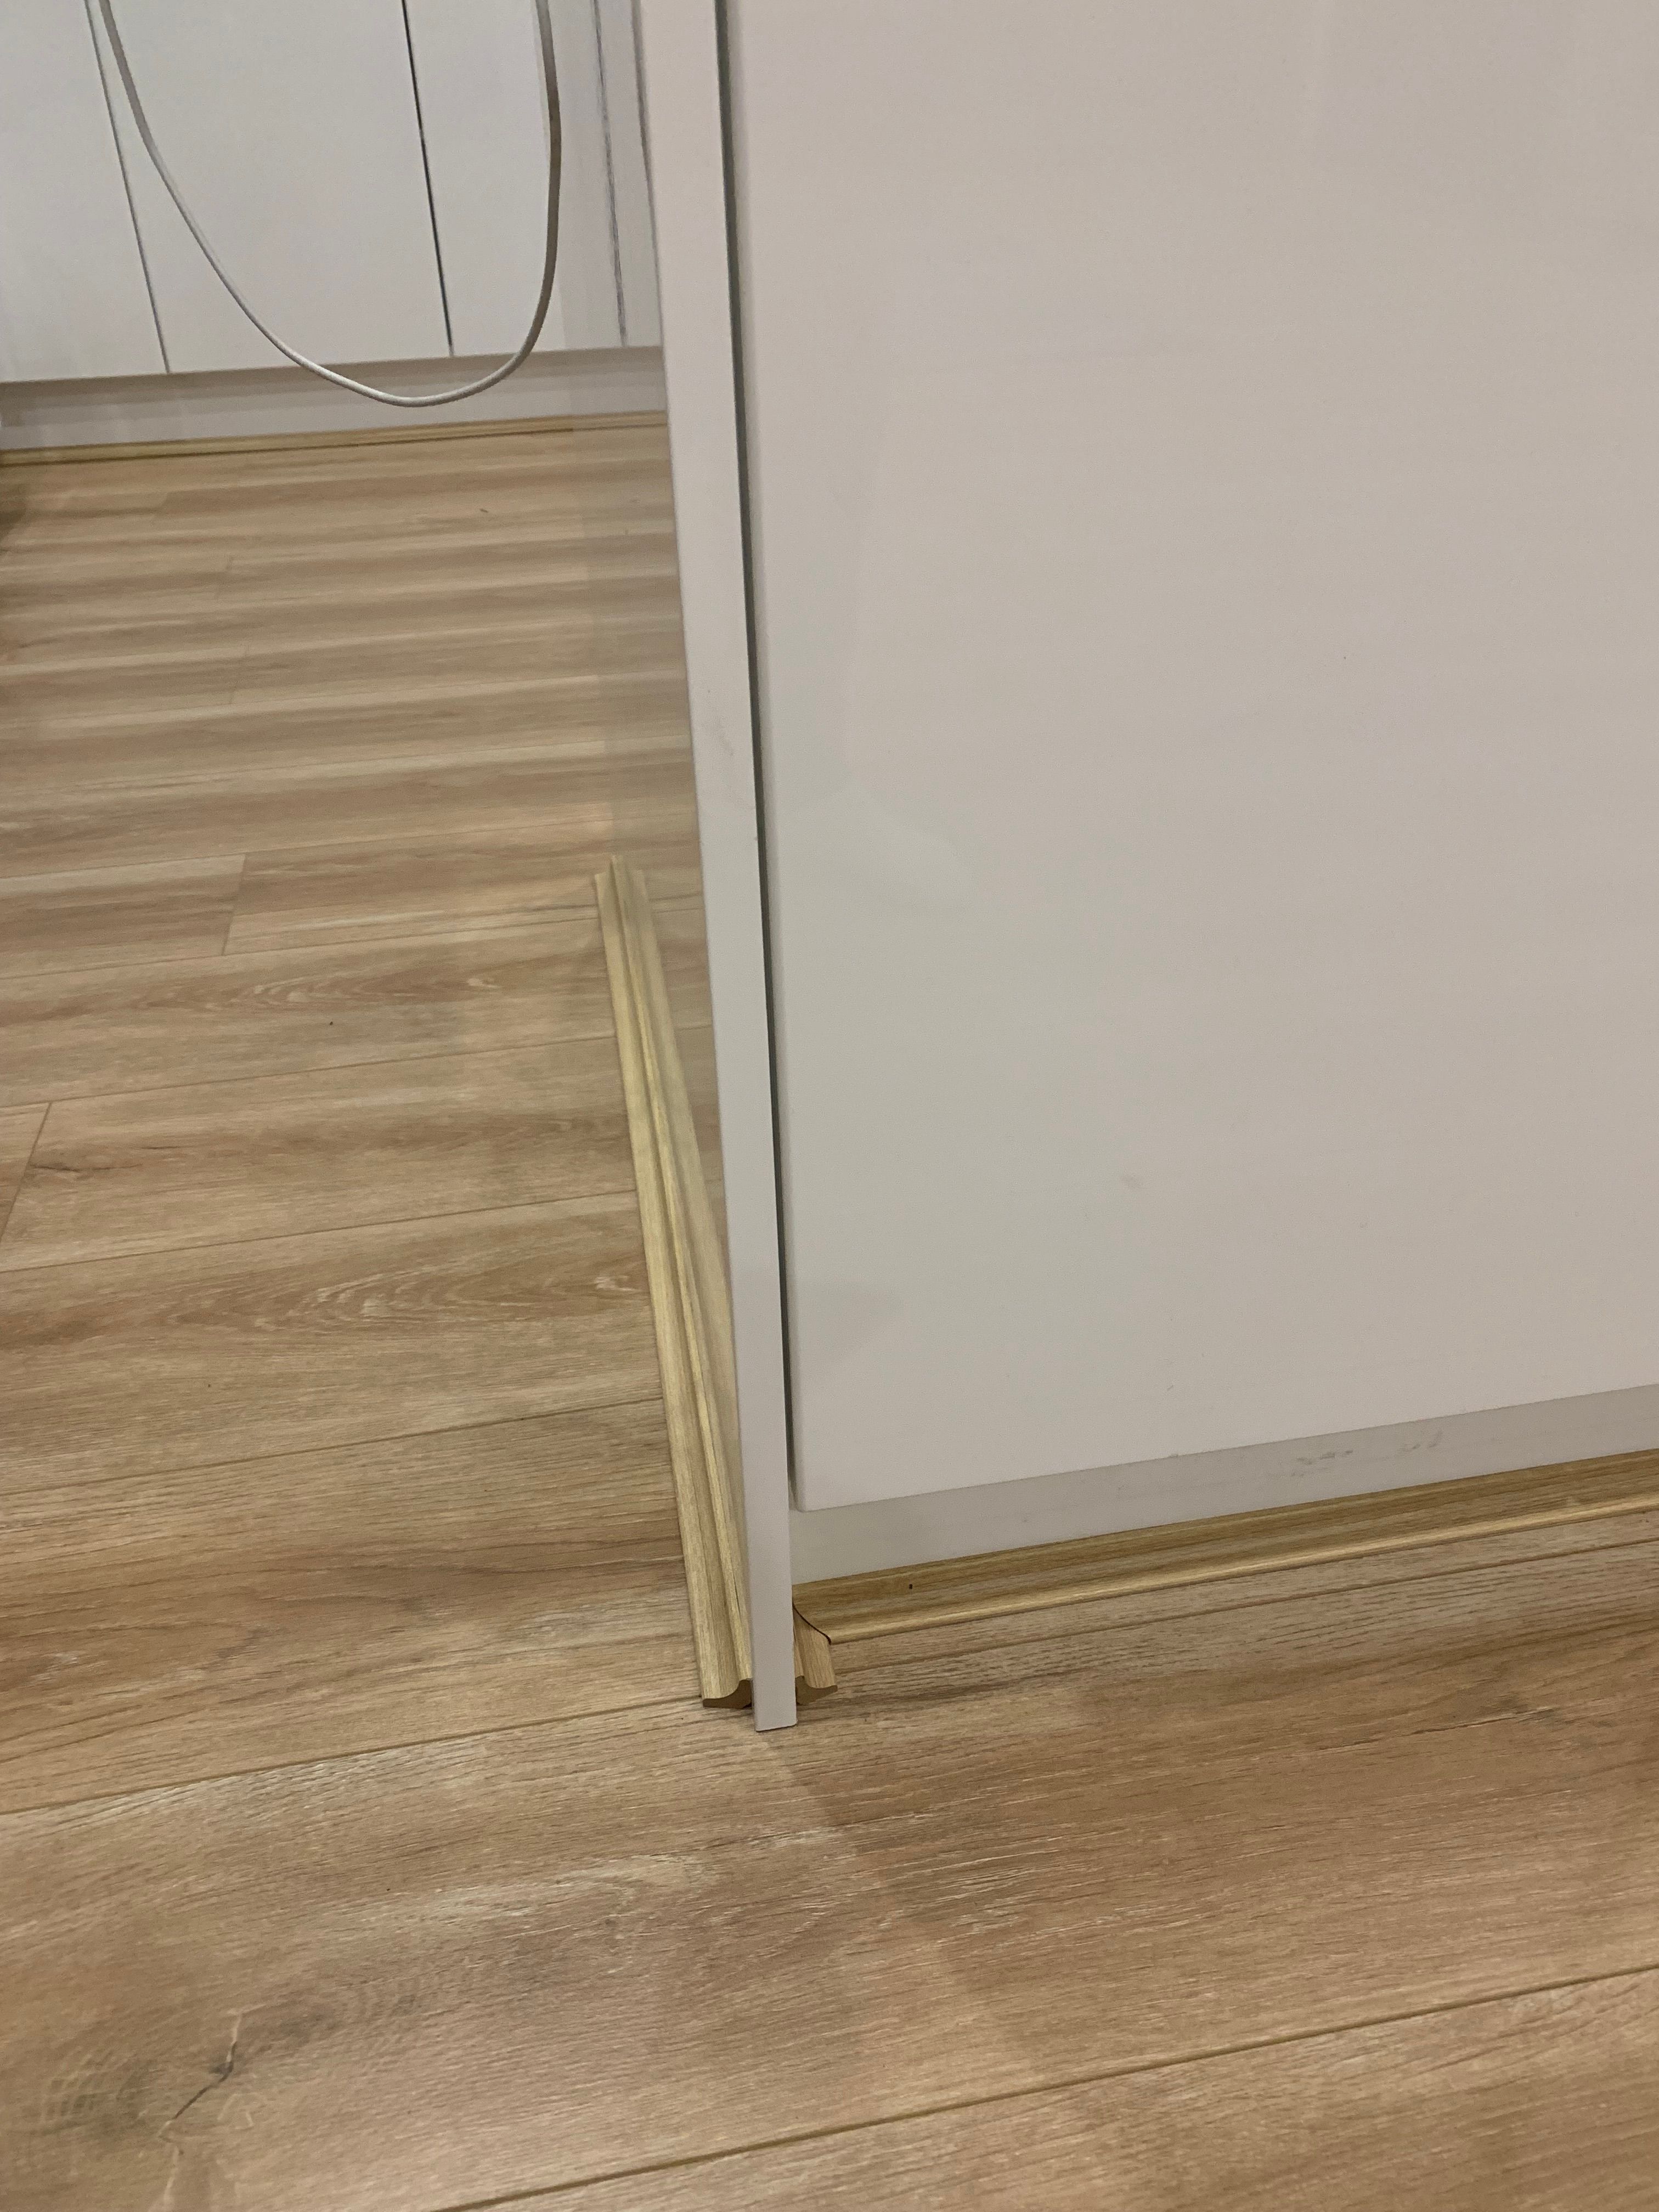 Suggestions wanted for flooring edge aro... | Bunnings Workshop community